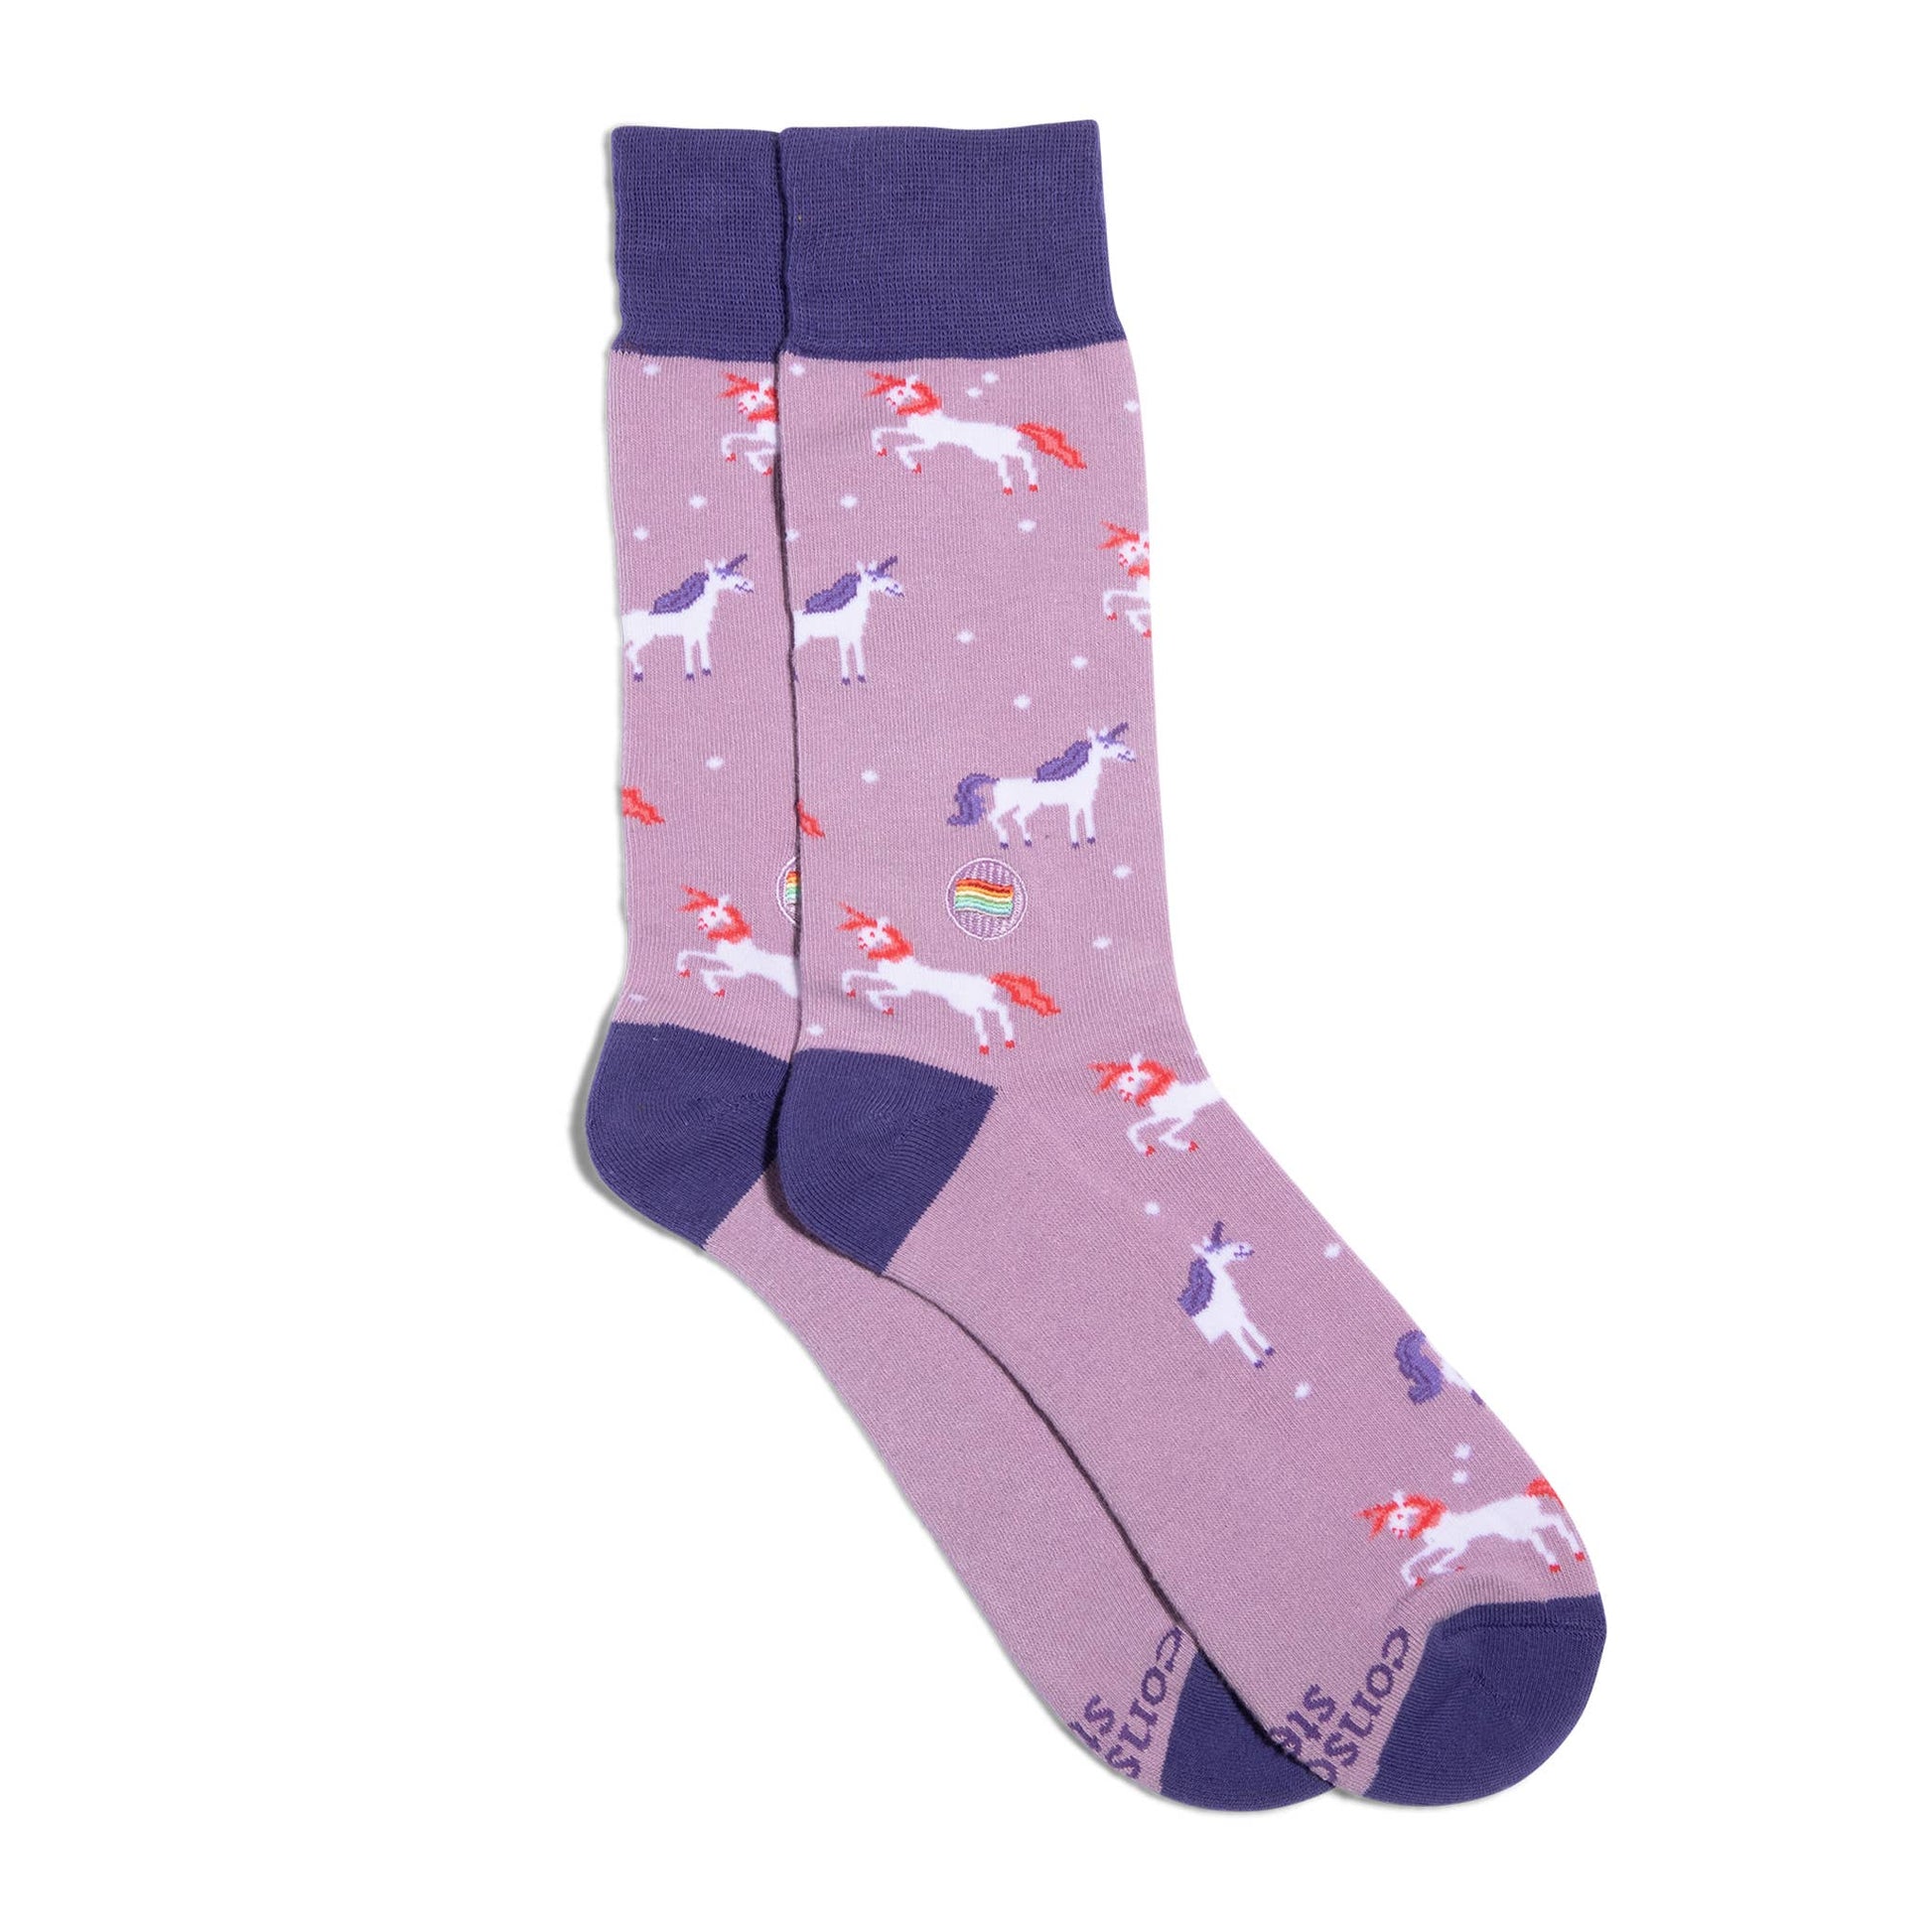 Conscious Step - Socks that Save LGBTQ Lives (Purple Unicorns)  Conscious Step Small  -better made easy-eco-friendly-sustainable-gifting